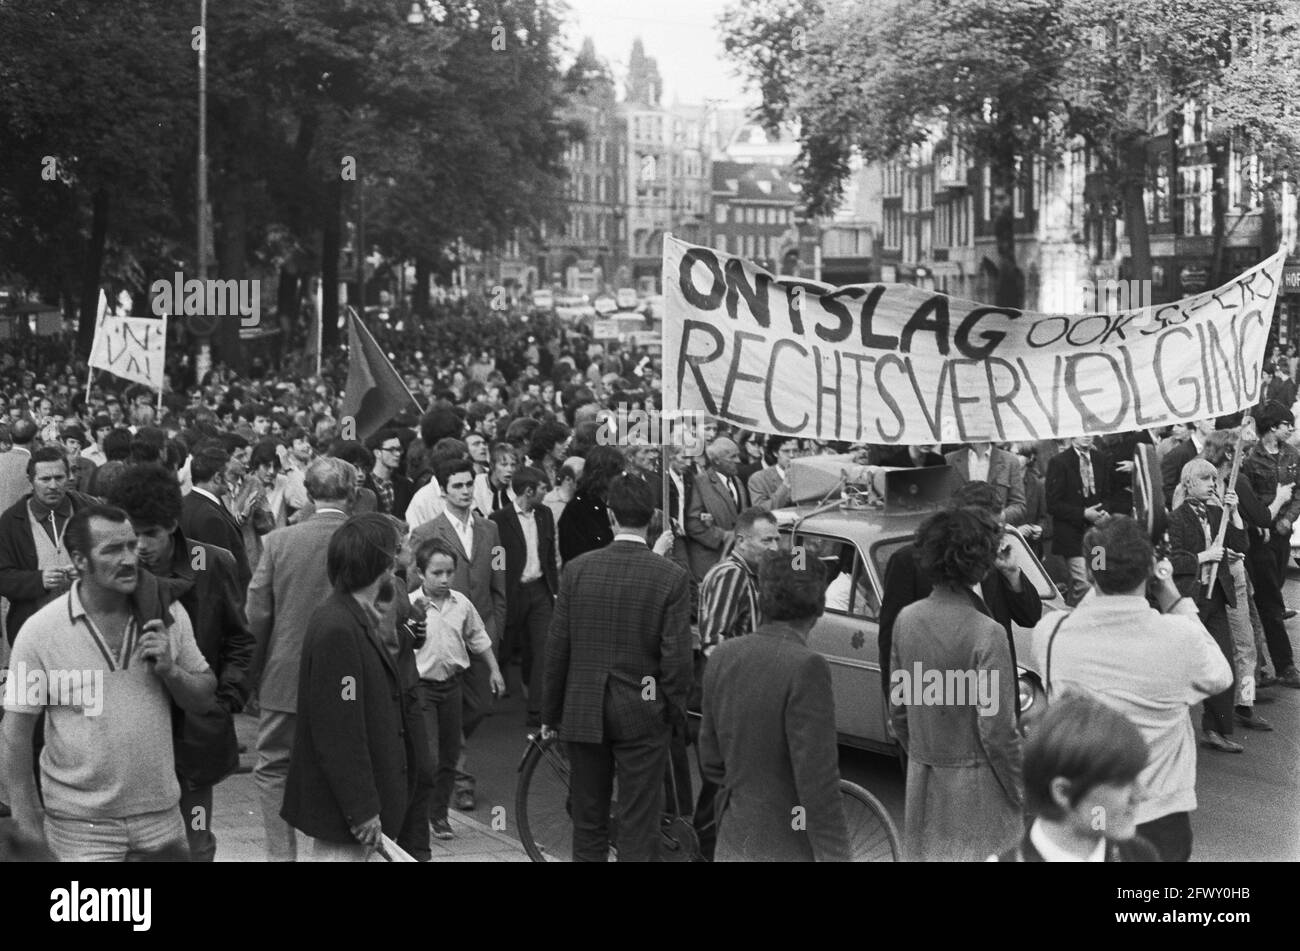 Protest demonstration students and workers lawsuit against Maagdenhuis occupiers from Westermarkt Amsterdam, procession with banner, 12 June 1969, WOR Stock Photo